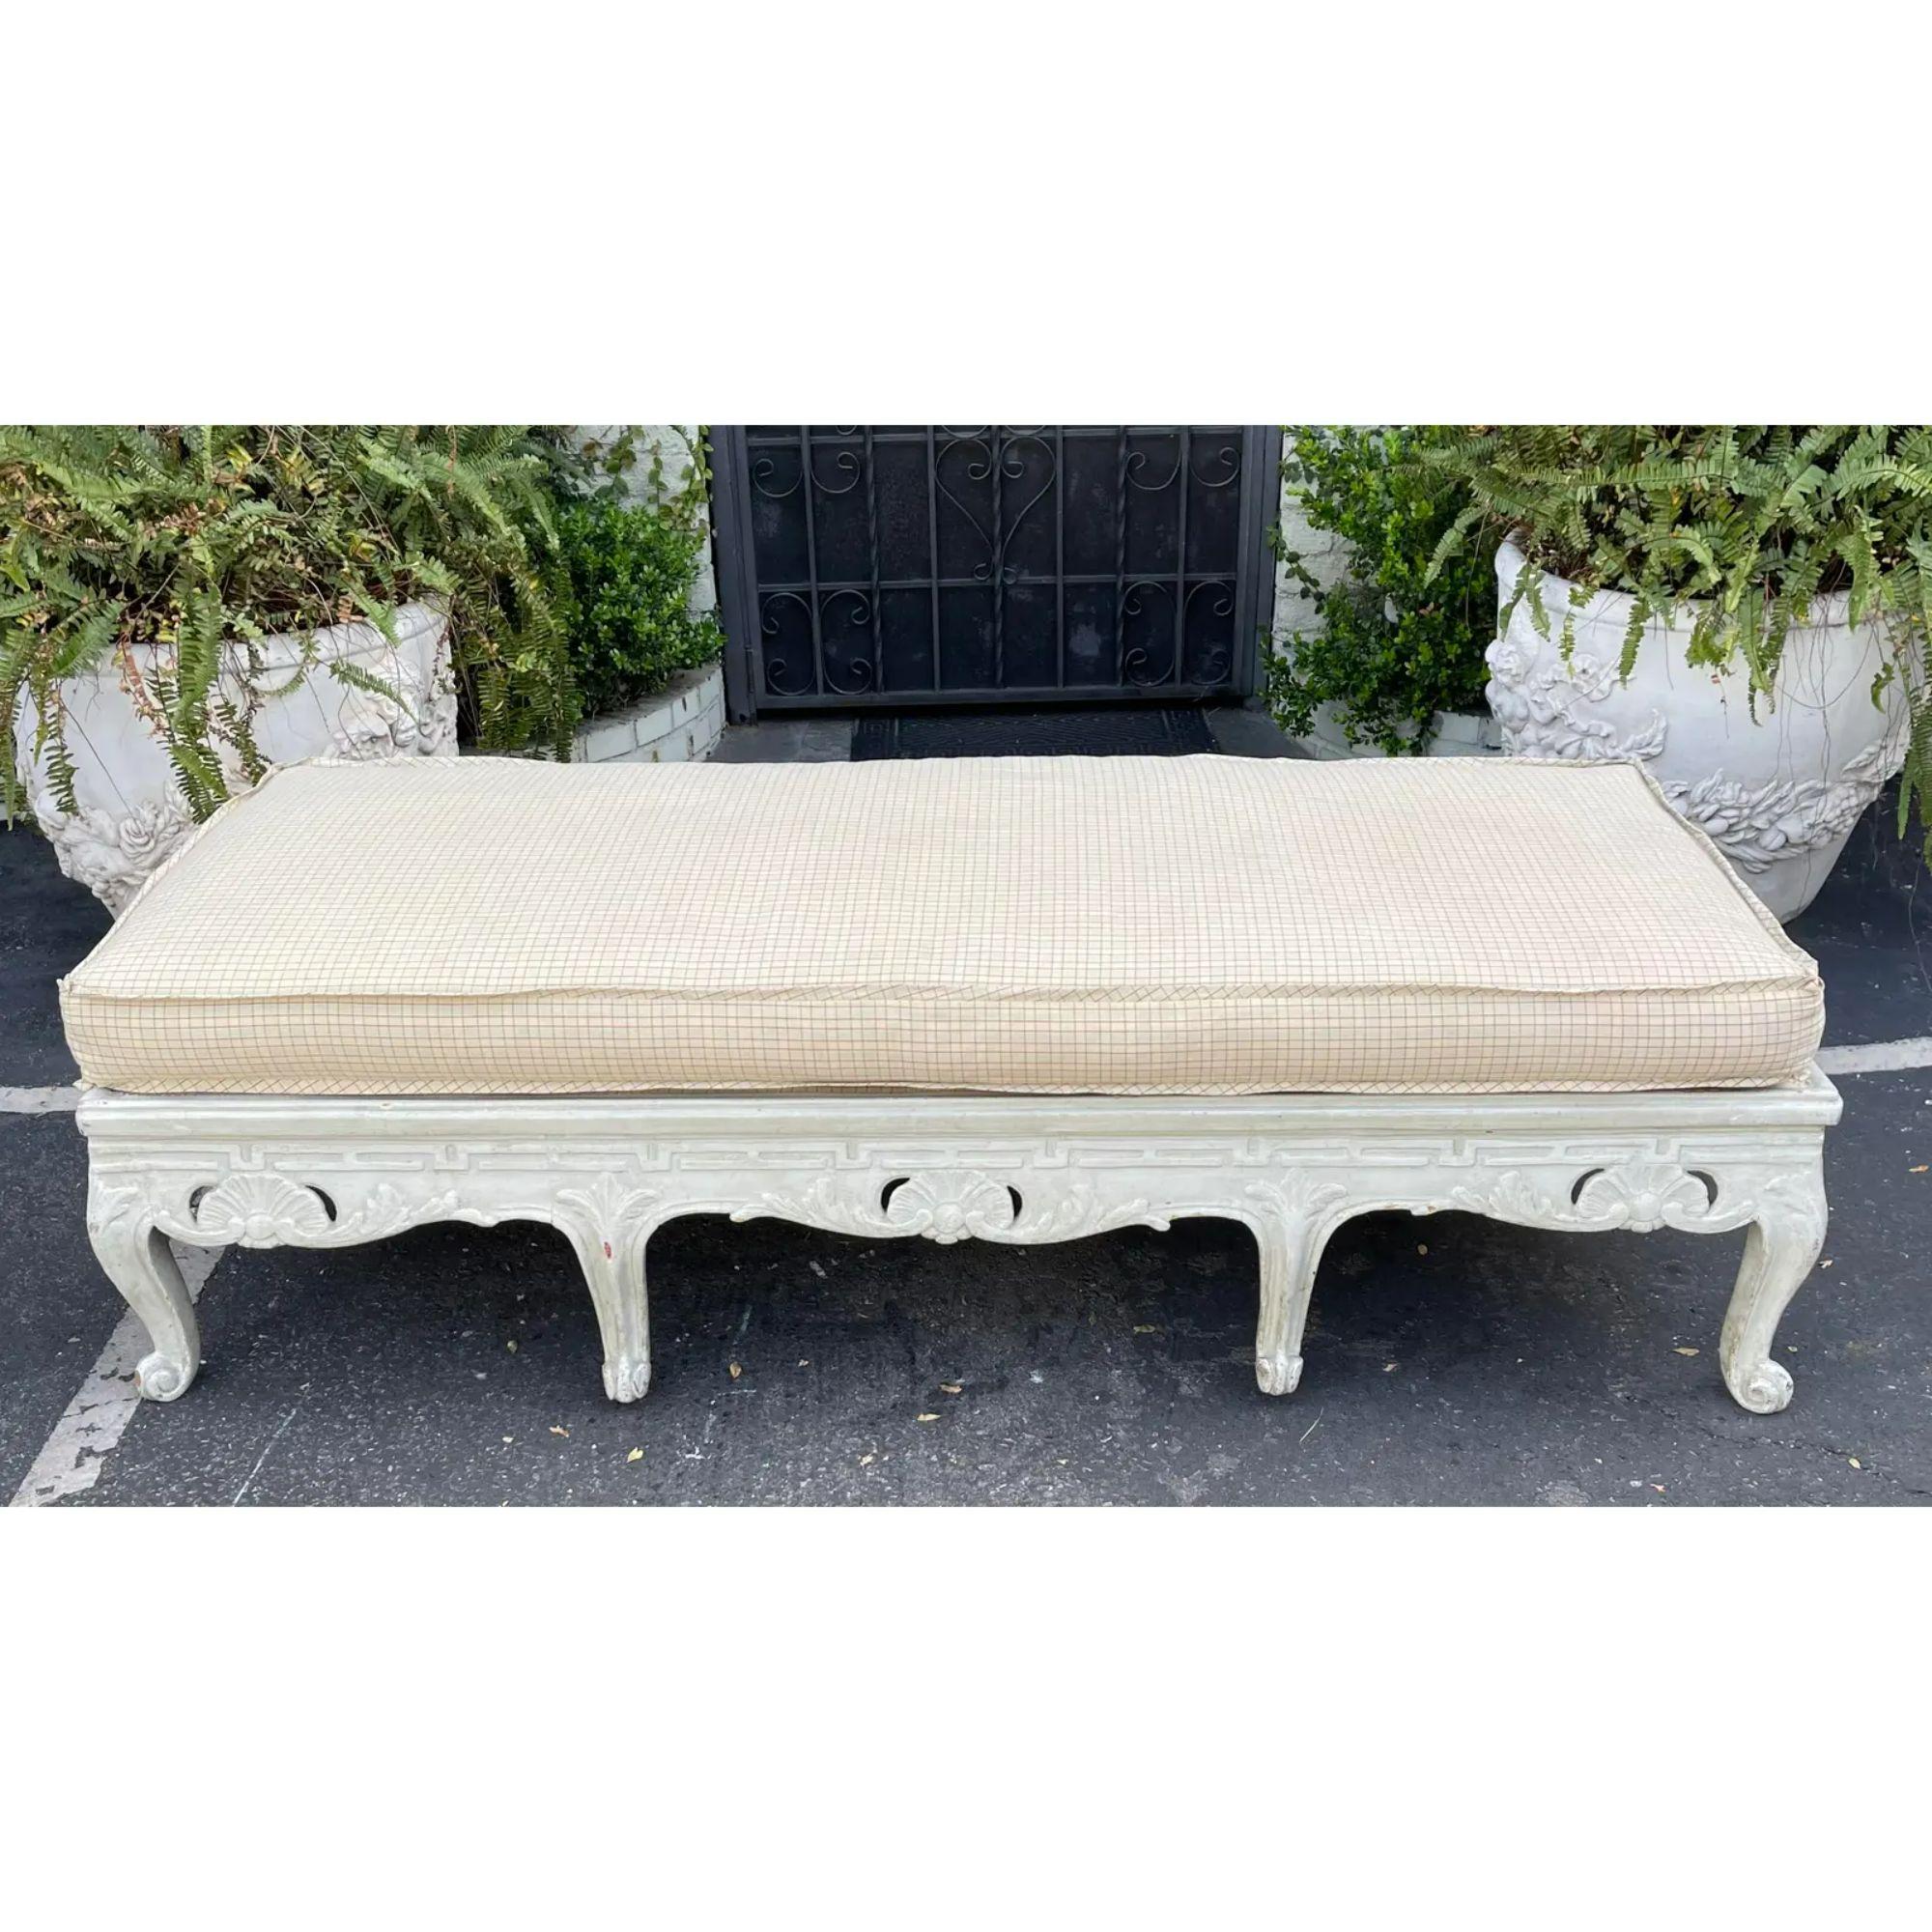 
Antique French Country Paint Decorated Bench with Down Filled Cushion

Additional information:
Materials: Feather, Paint, Wood
Color: Green
Period: Early 19th Century
Styles: French Country
Number of Seats: 3
Item Type: Vintage, Antique or